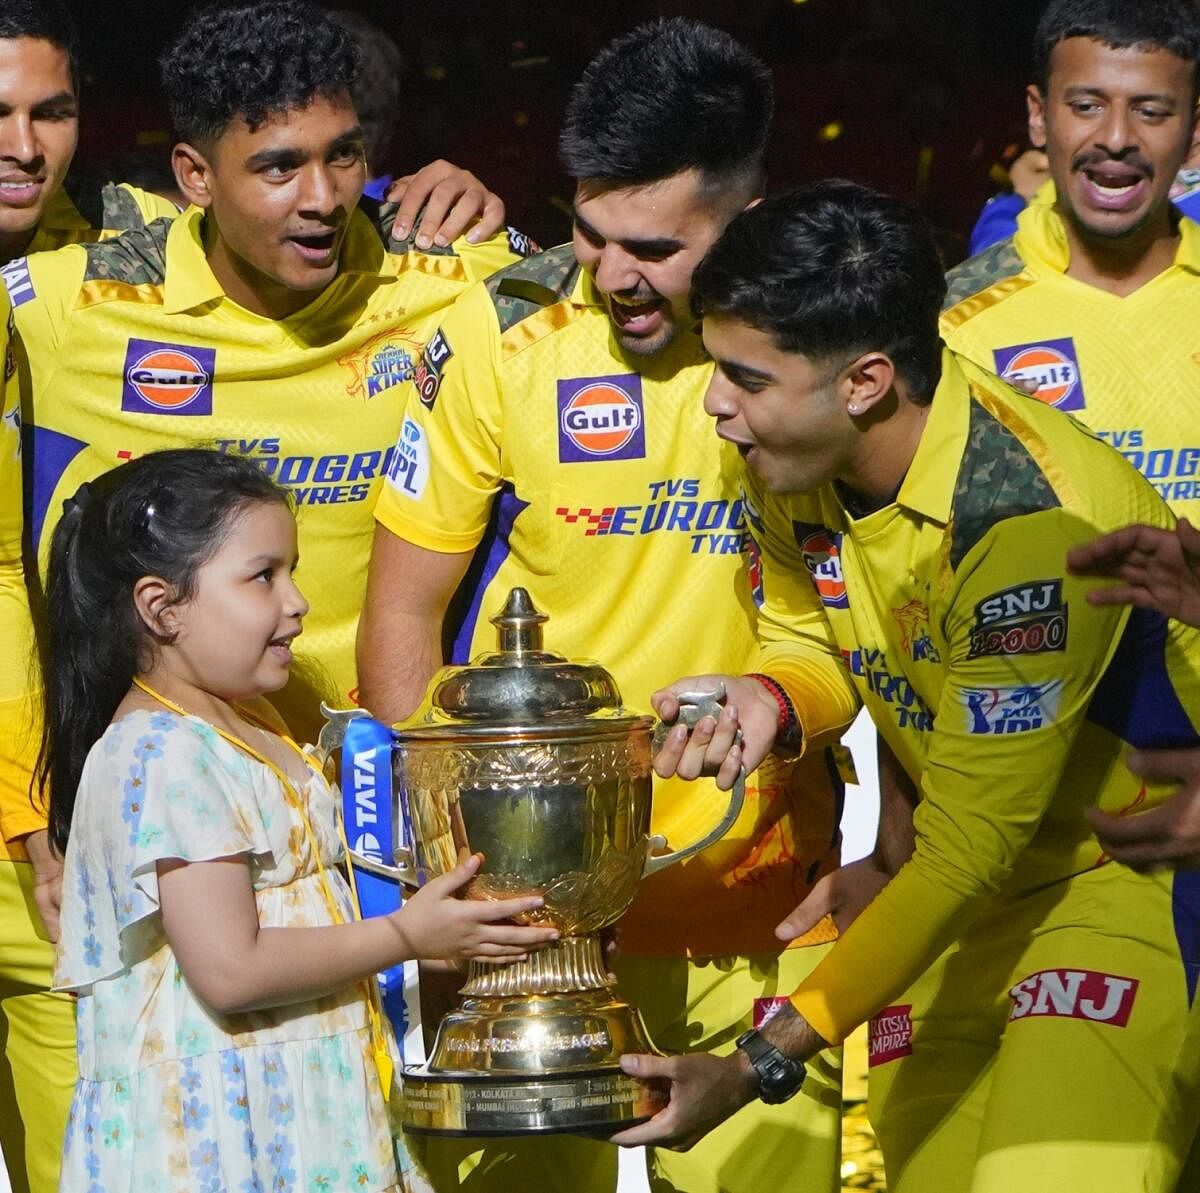 Chennai Super Kings players are joined by skipper M S Dhoni's daughter Ziva as they celebrate their win. Credit: IANS Photo